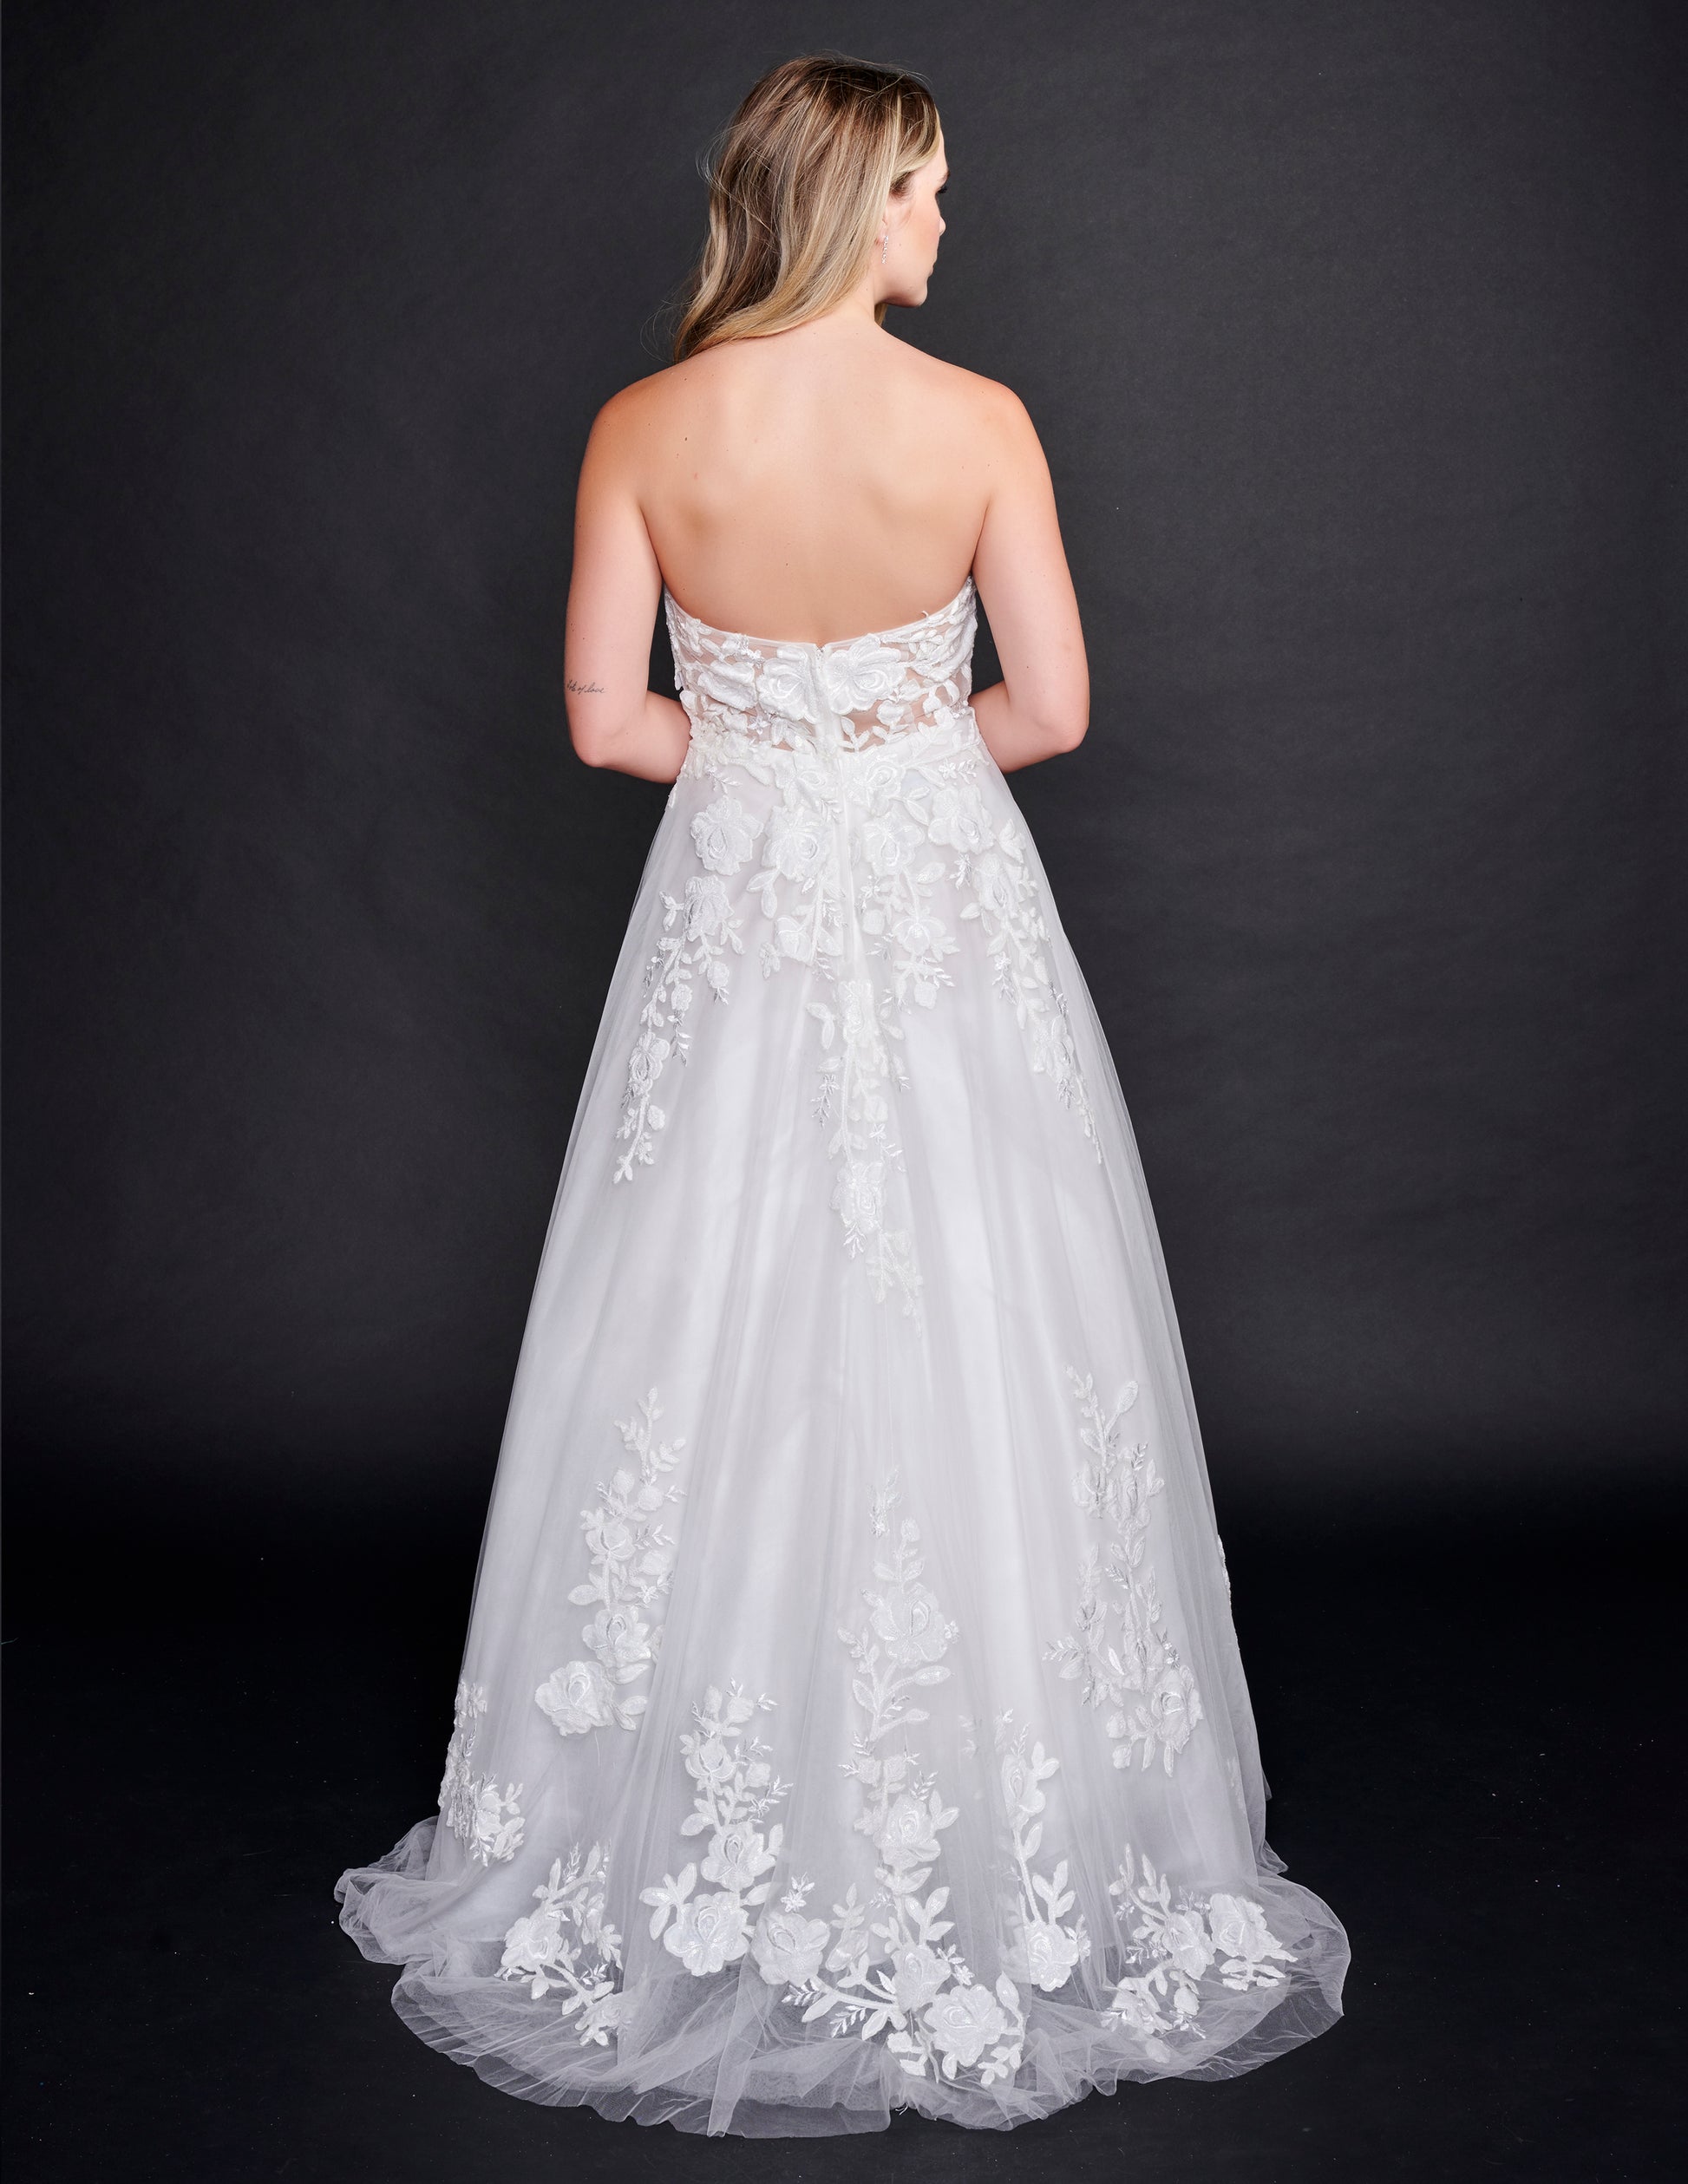 Nina Canacci 2361 Ivory Wedding Dress Sweetheart Neckline A Line Floral Lace Ballgown Strapless